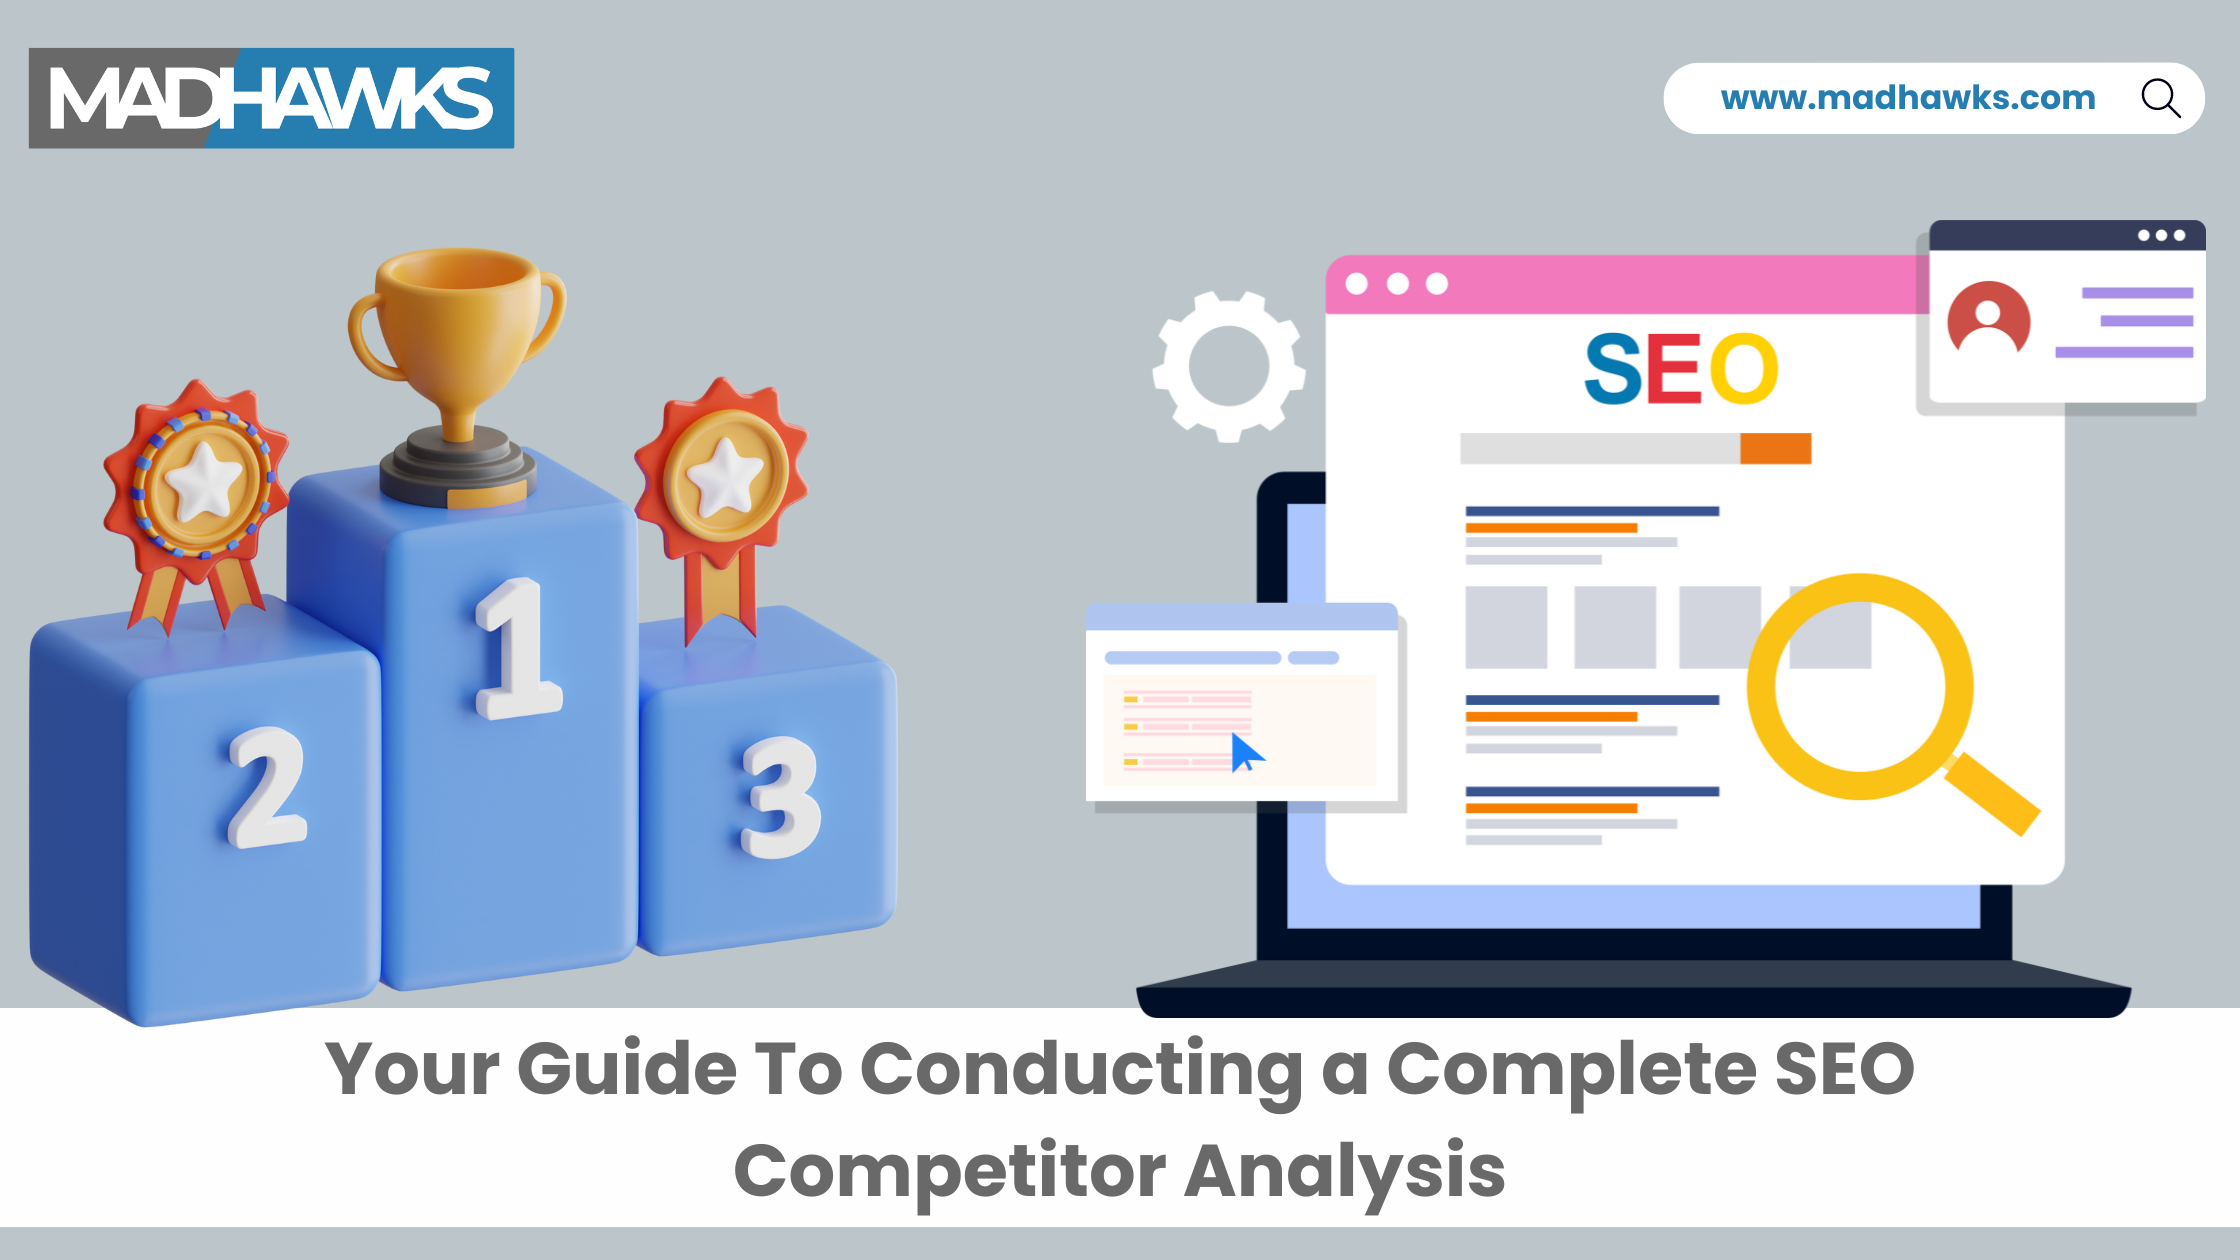 Your Guide To Conducting a Complete SEO Competitor Analysis